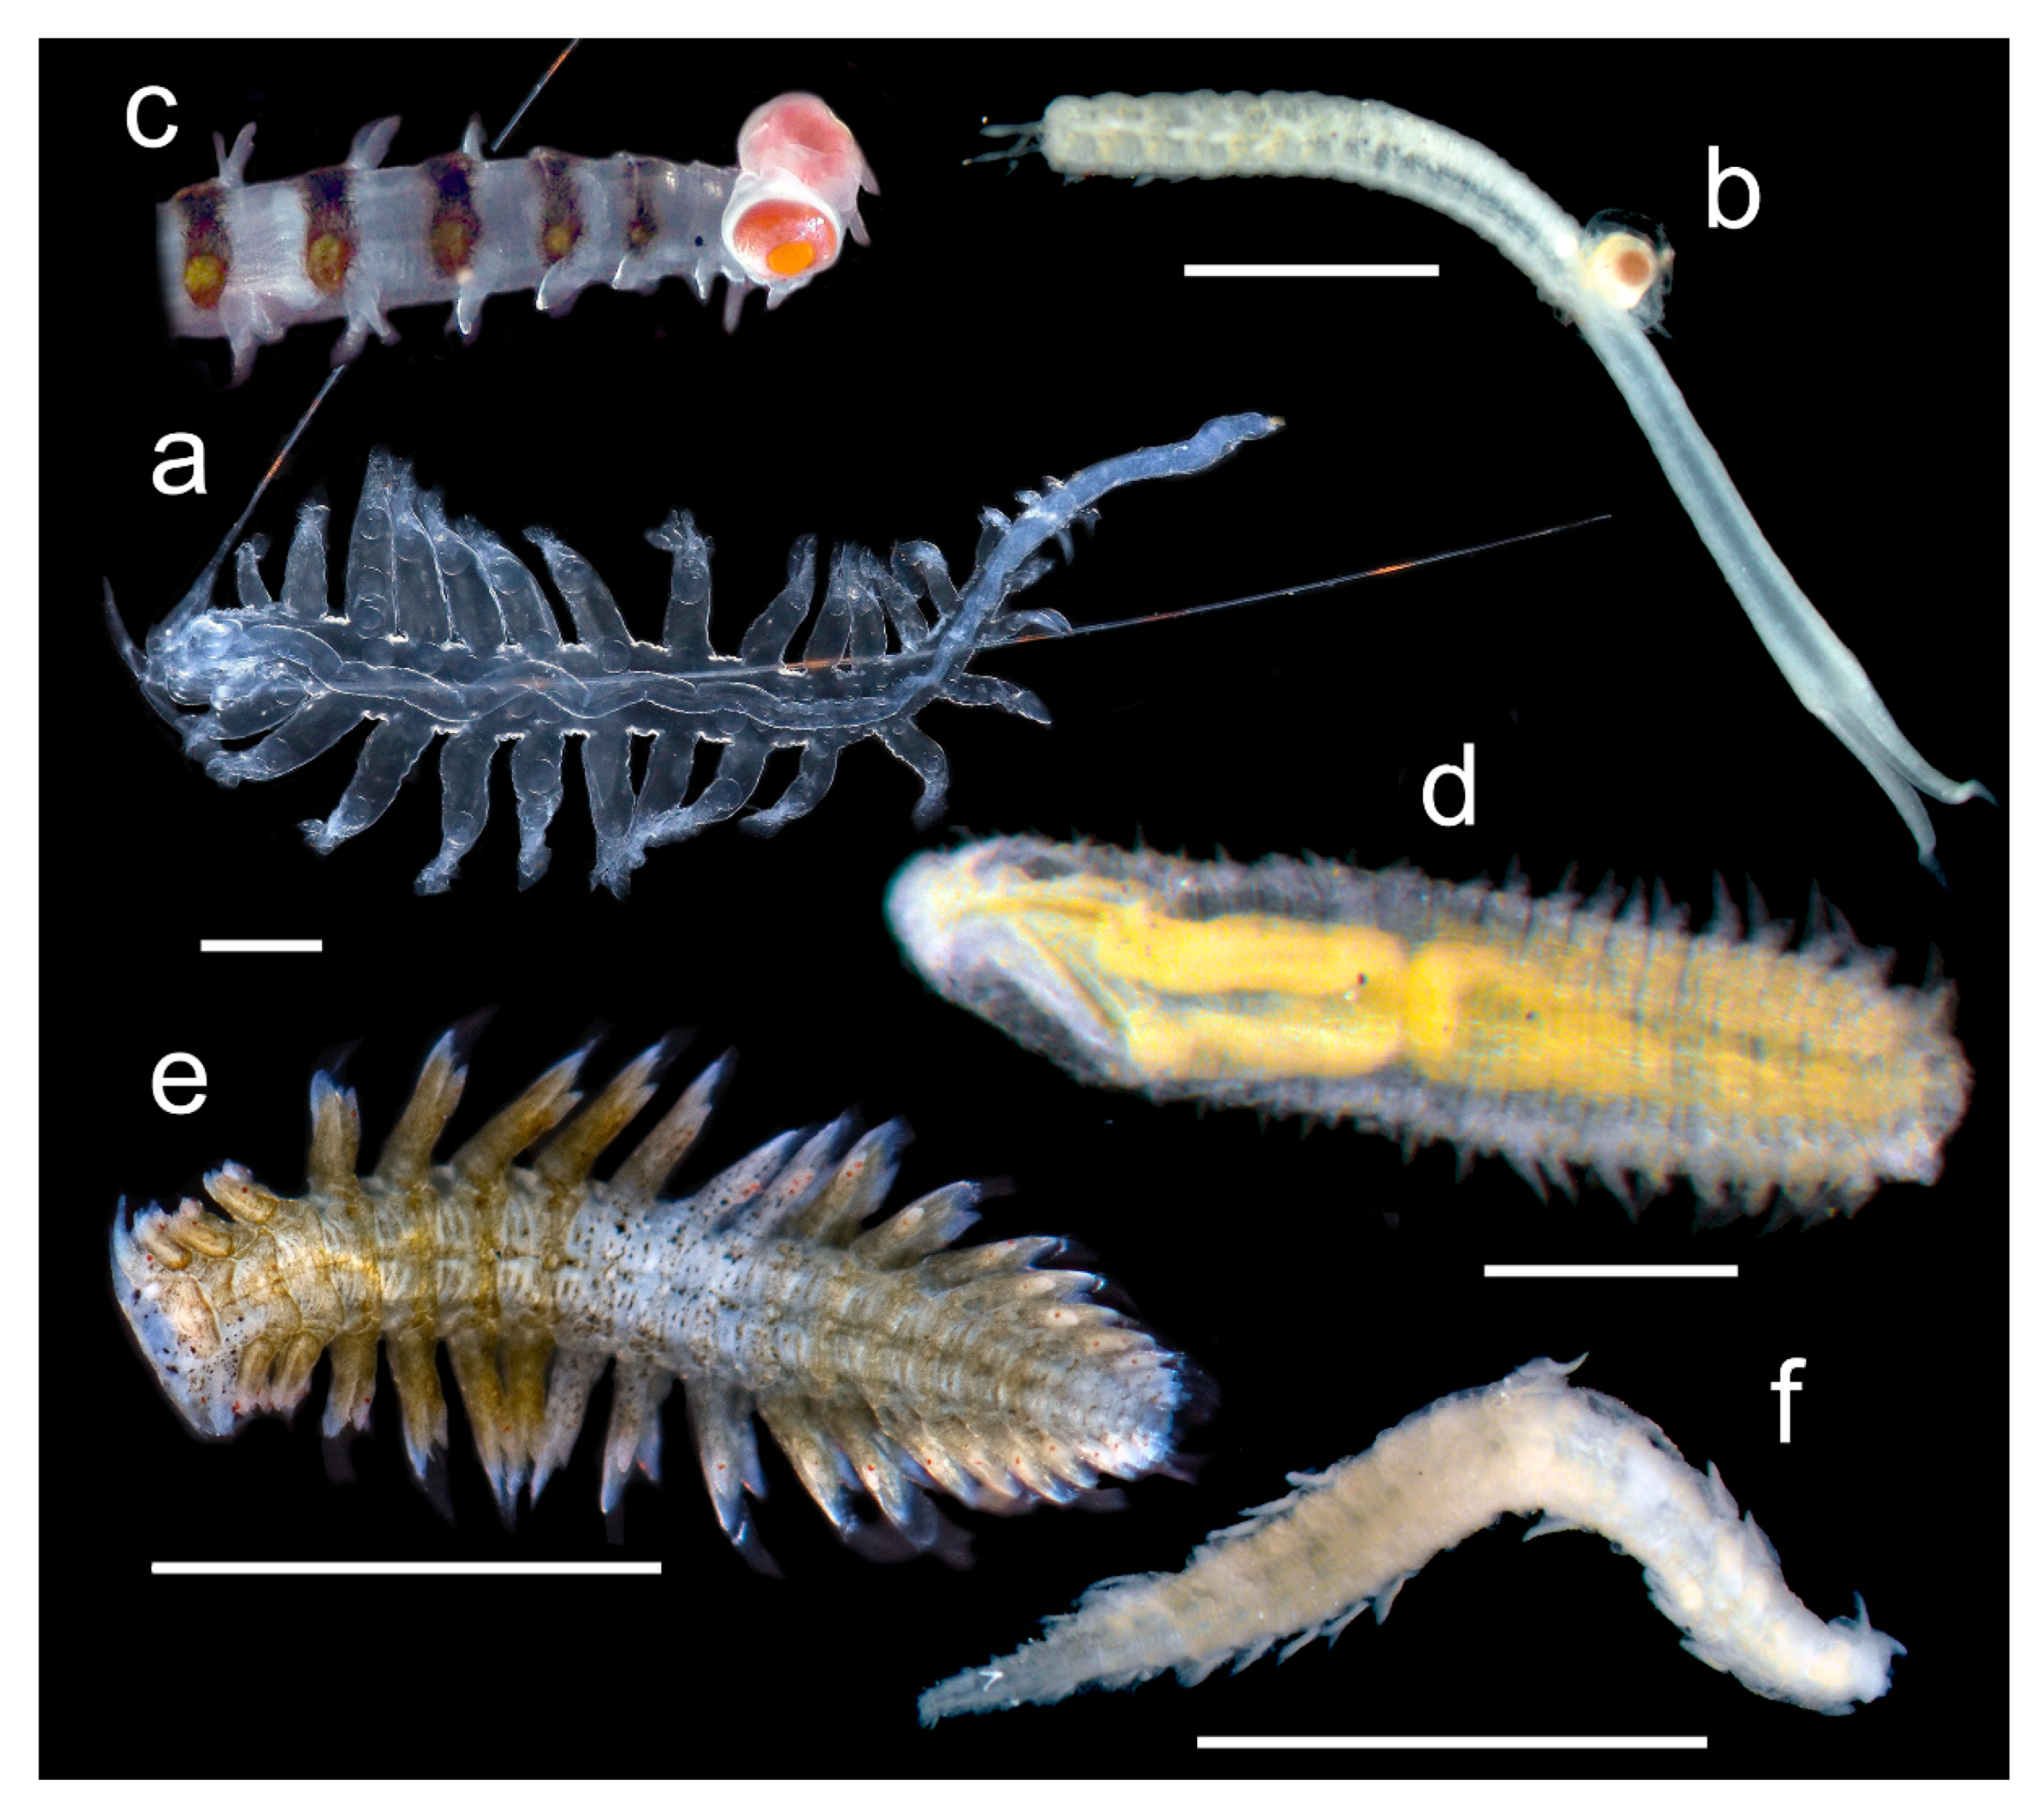 Diversity | Free Full-Text | On the Diversity of Phyllodocida (Annelida:  Errantia), with a Focus on Glyceridae, Goniadidae, Nephtyidae, Polynoidae,  Sphaerodoridae, Syllidae, and the Holoplanktonic Families | HTML